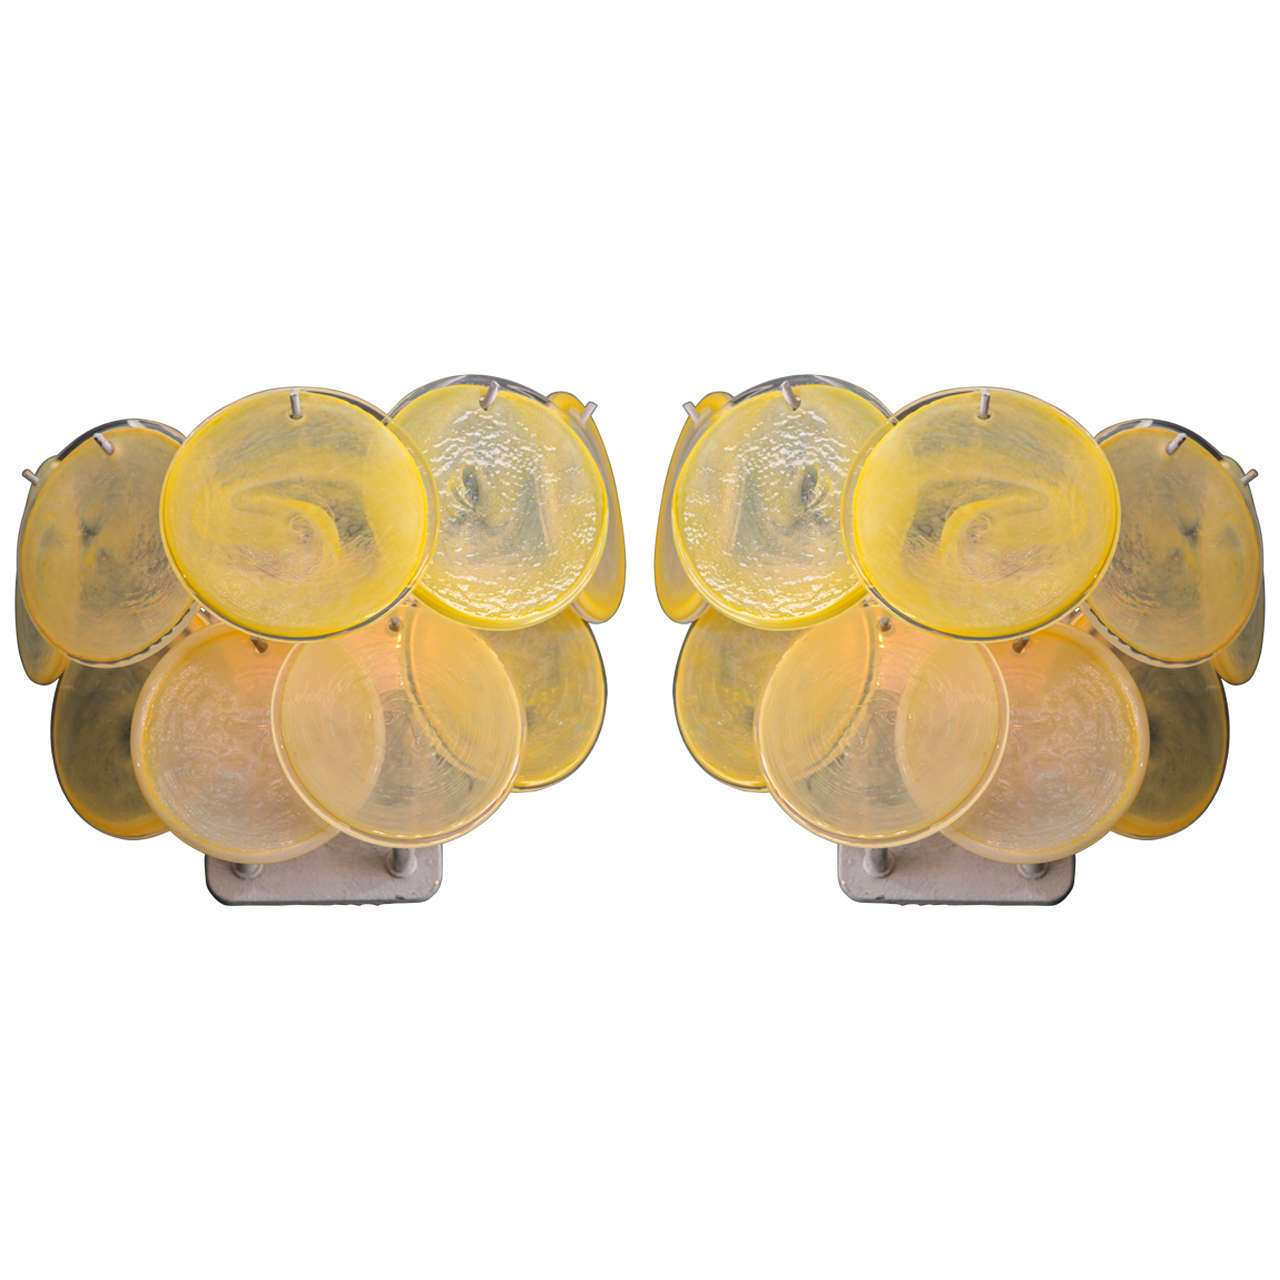 Pair of Vintage Italian Murano Glass Disk Sconces in the Style of Vistosi